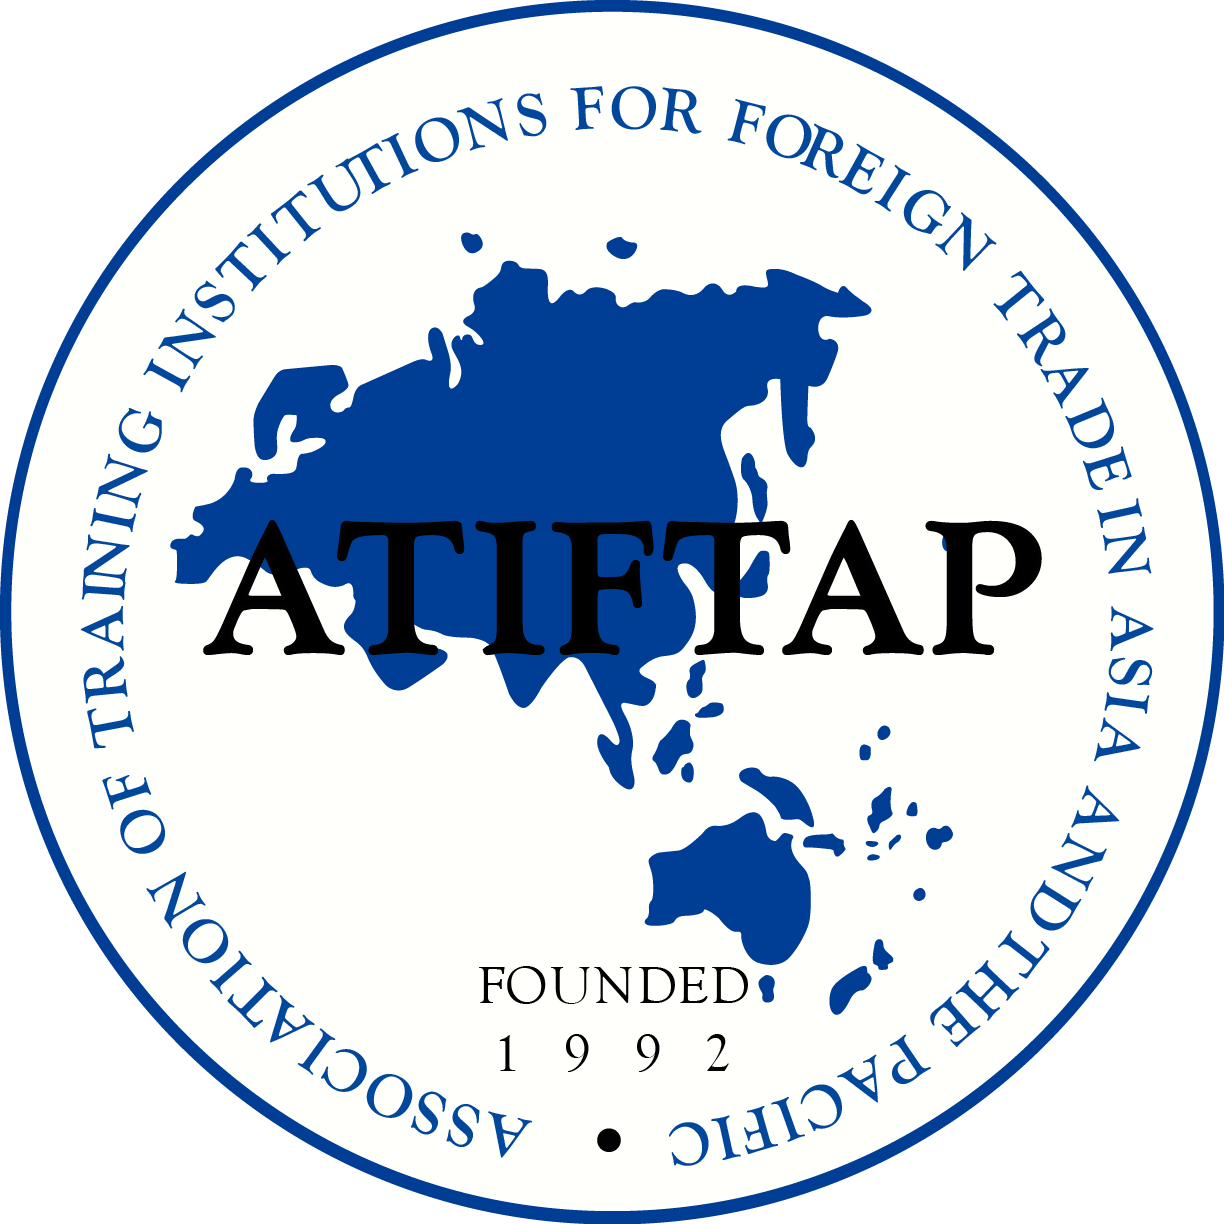 ATIFTAP - Association of Training Institutions for Foreign Trade in Asia and the Pacific